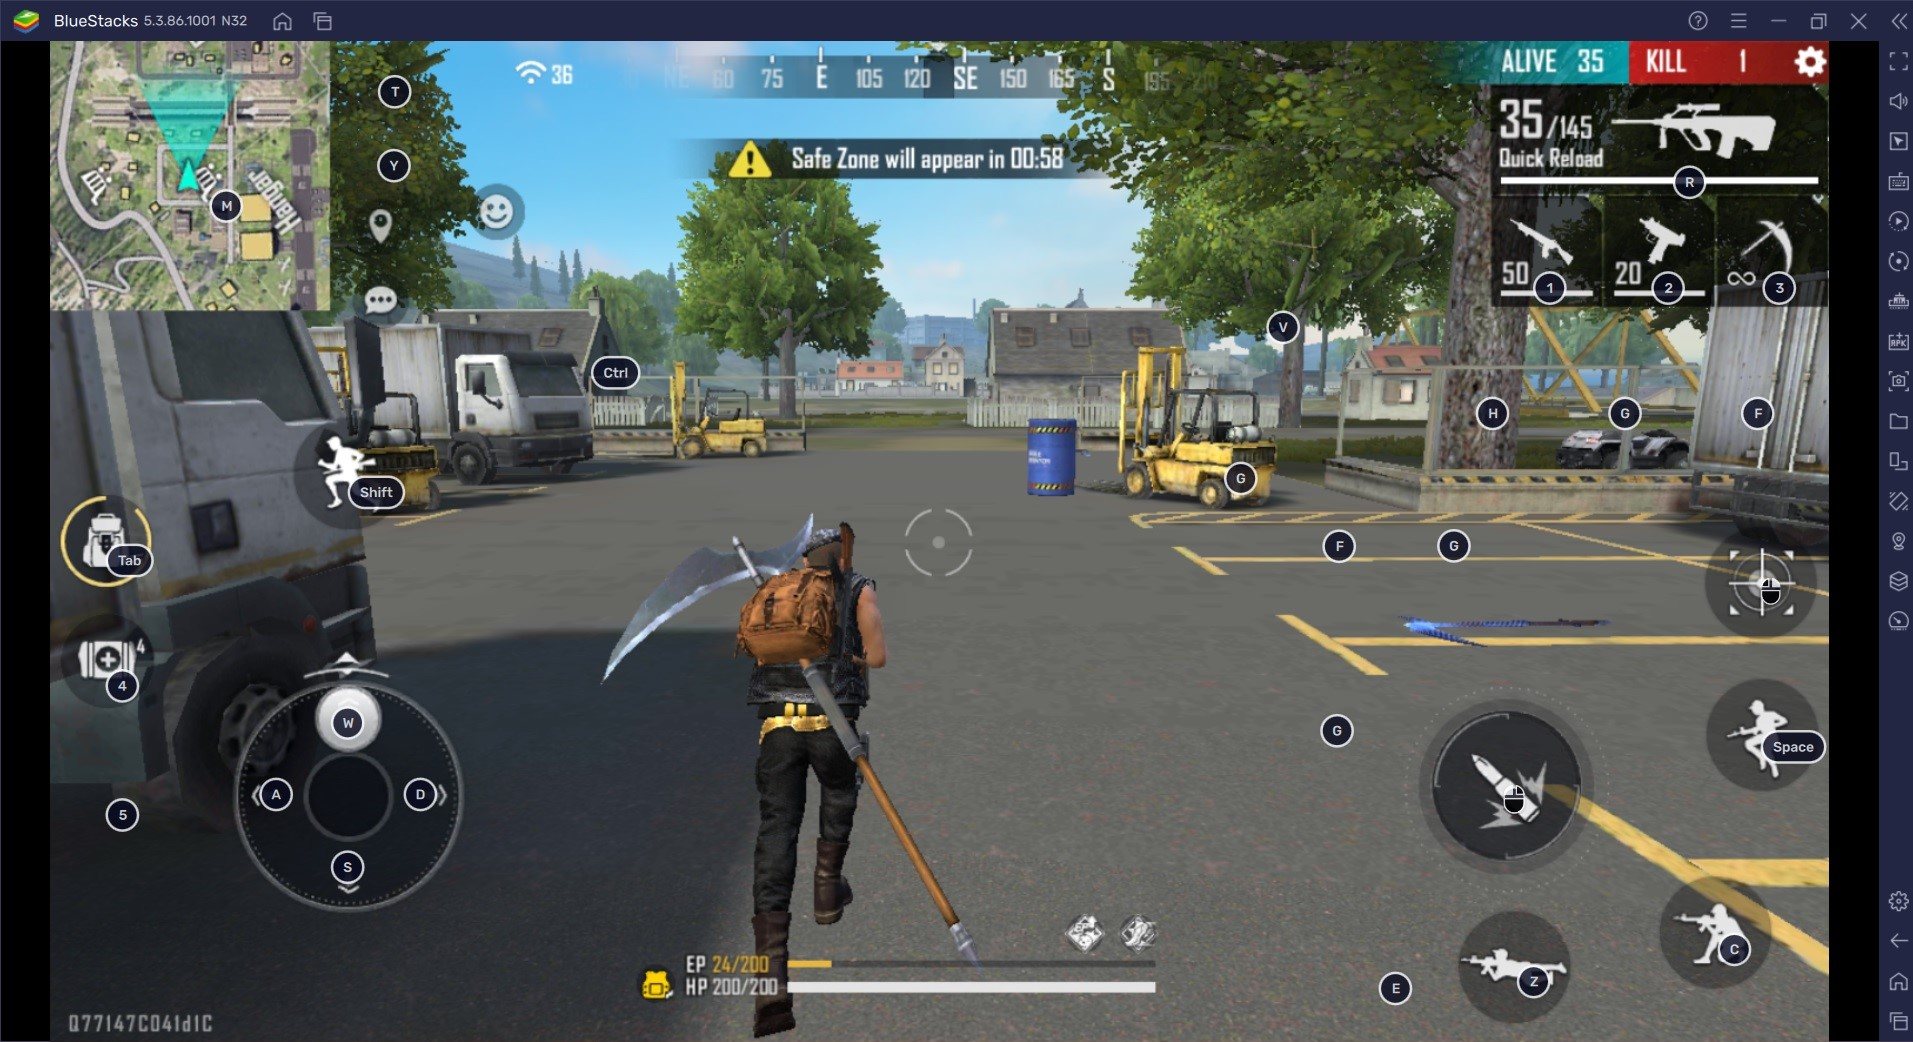 How to download Free Fire Max on PC: Step-by-step installation